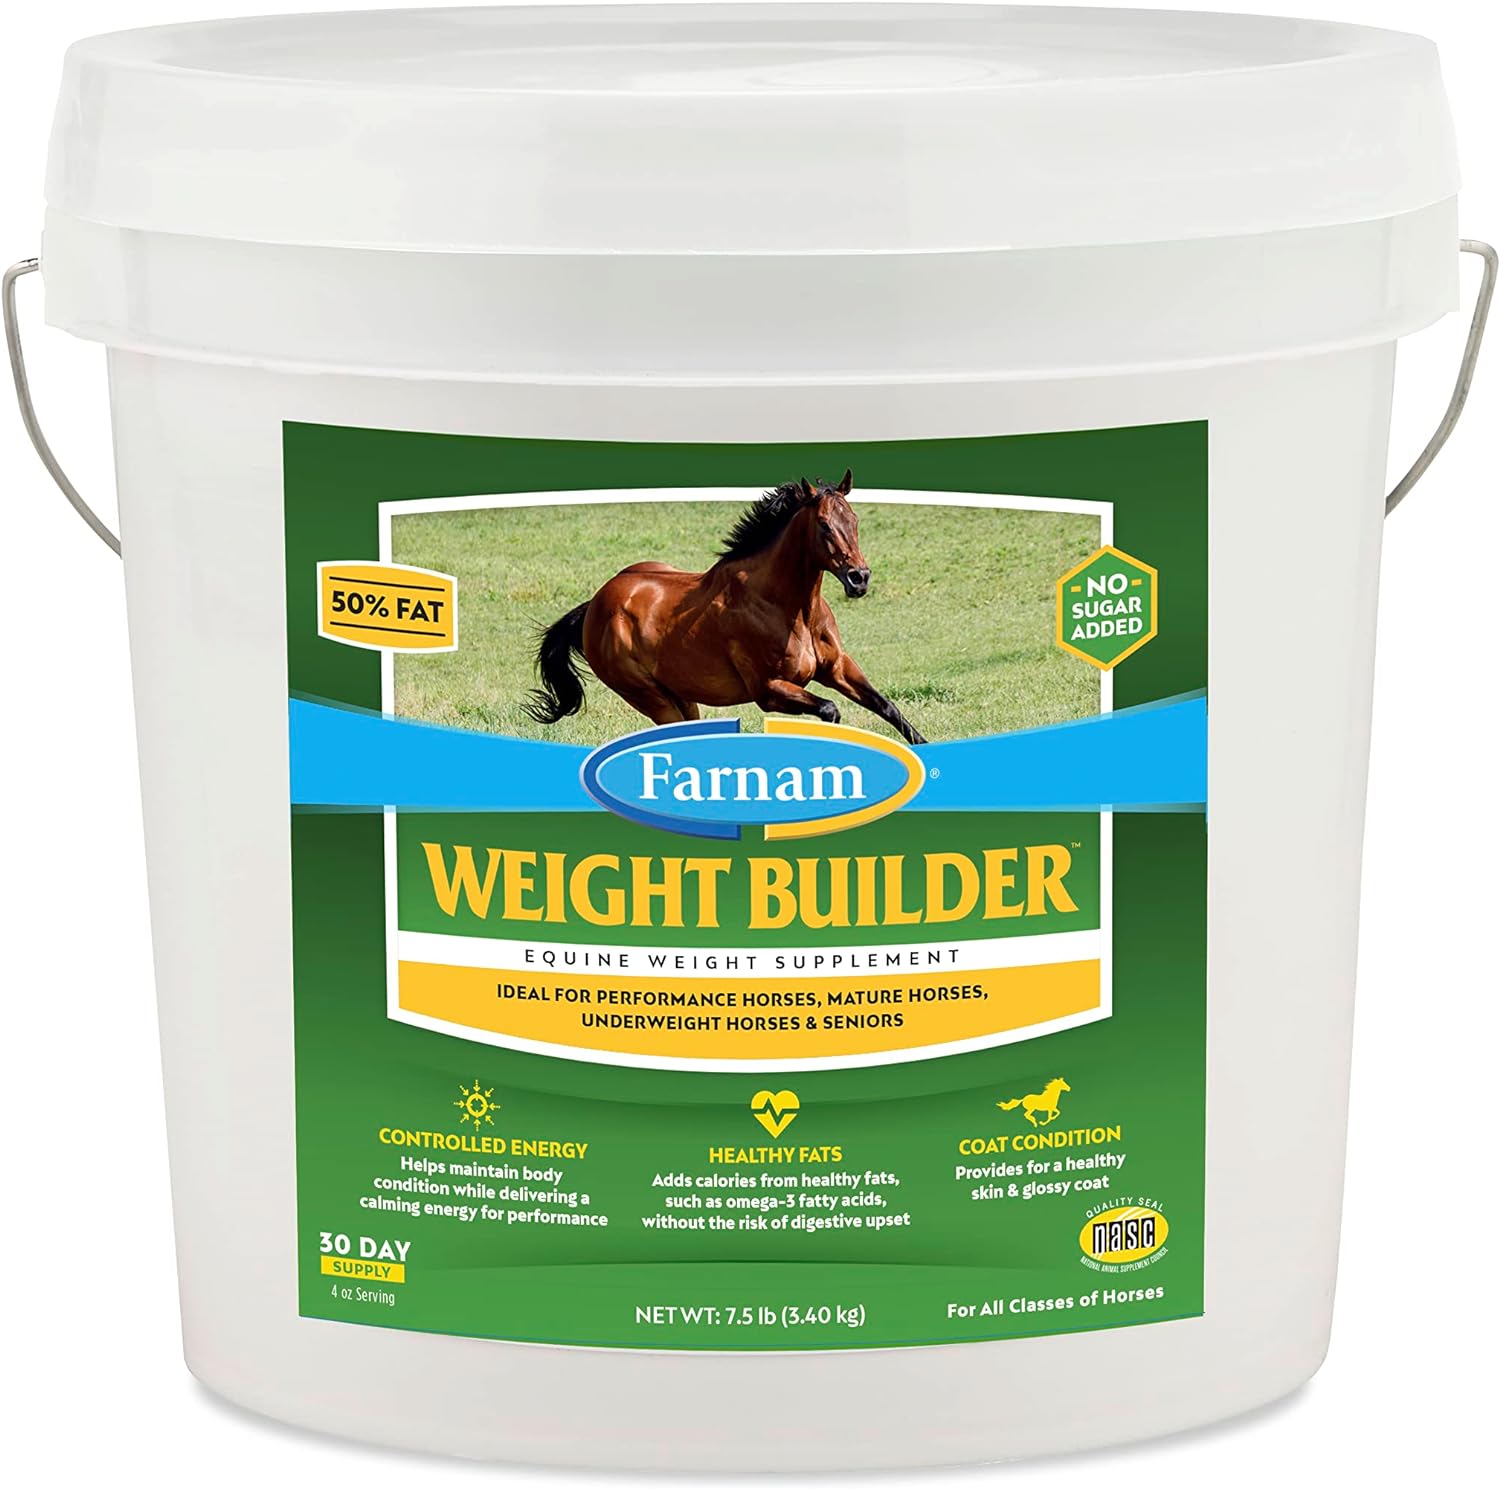 Farnam Weight Builder Horse Weight Supplement, Helps Maintain Optimal Weight and Body Condition with